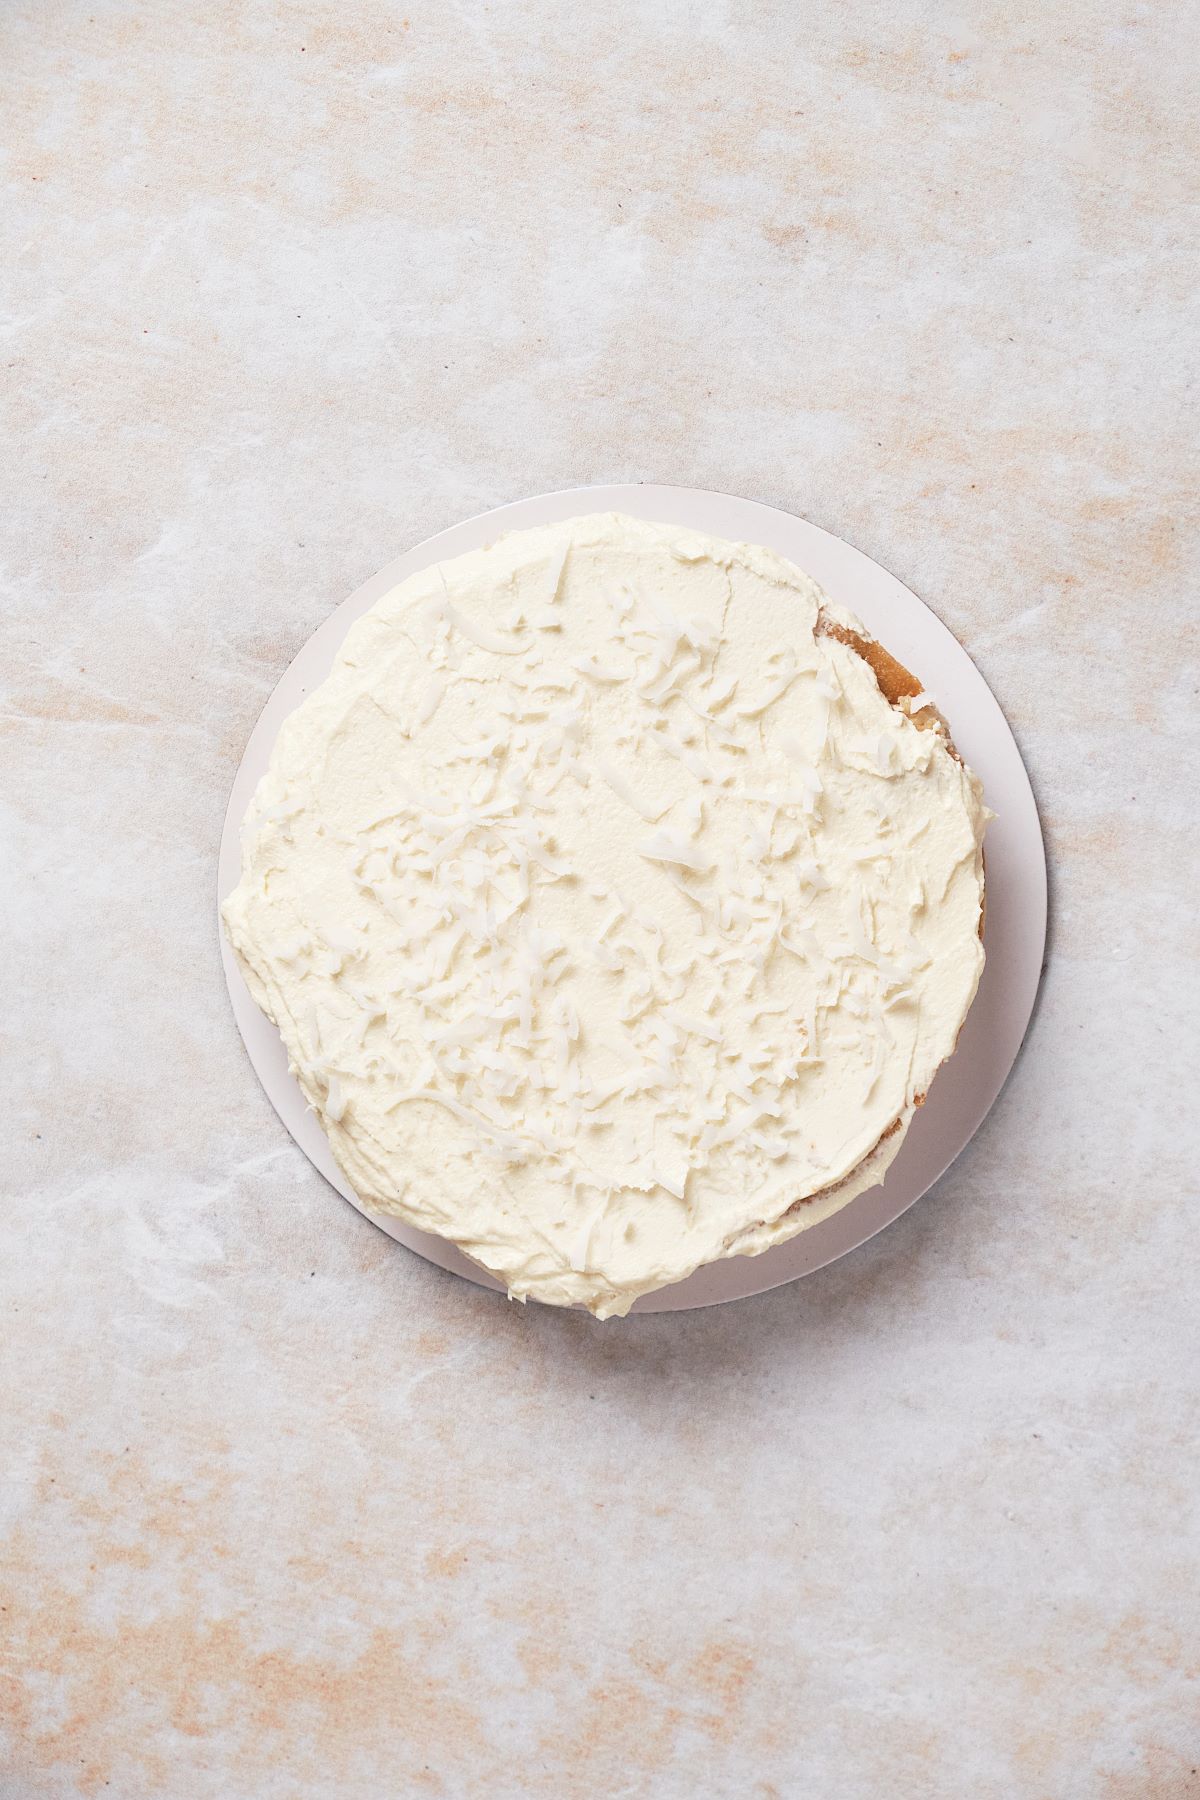 Layering the coconut cake with buttercream and coconut flakes.